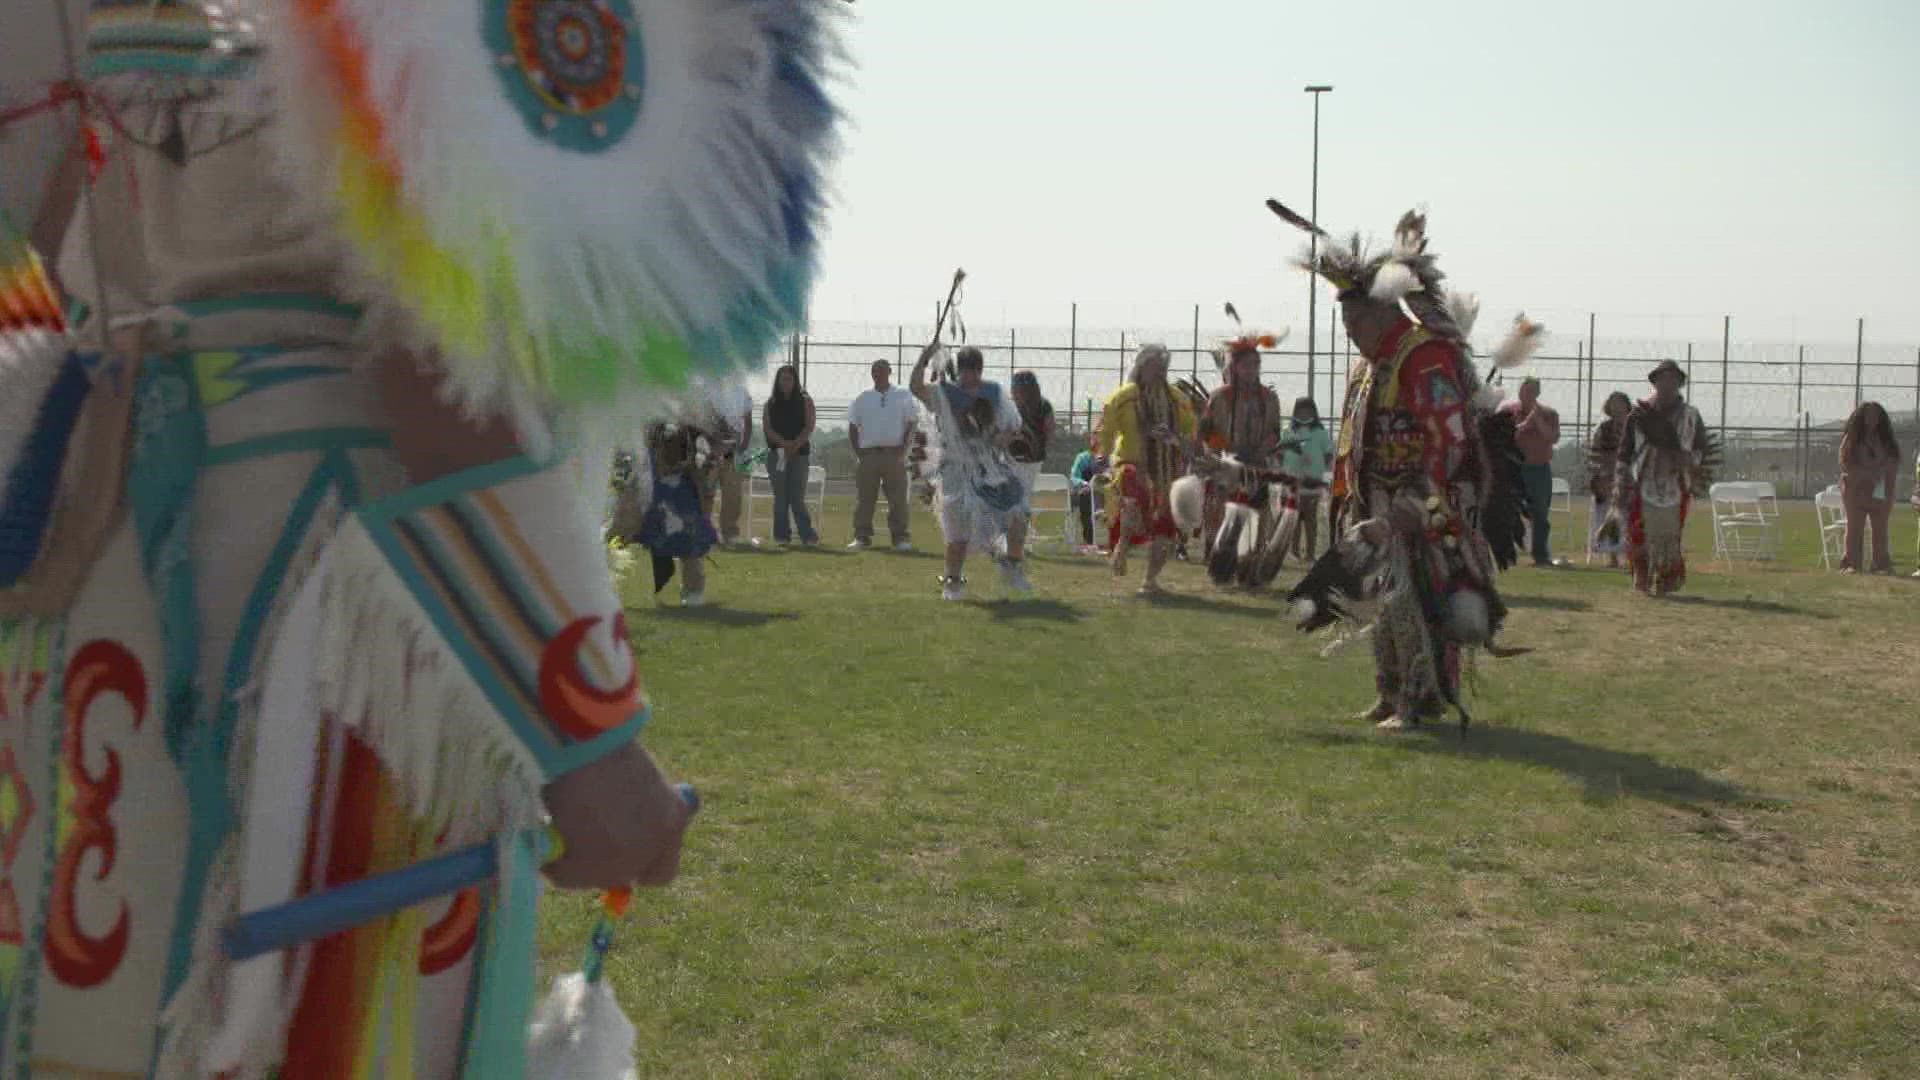 For the first time in nearly three years, inmates of the Washington State Penitentiary in Walla Walla hosted a traditional Native powwow